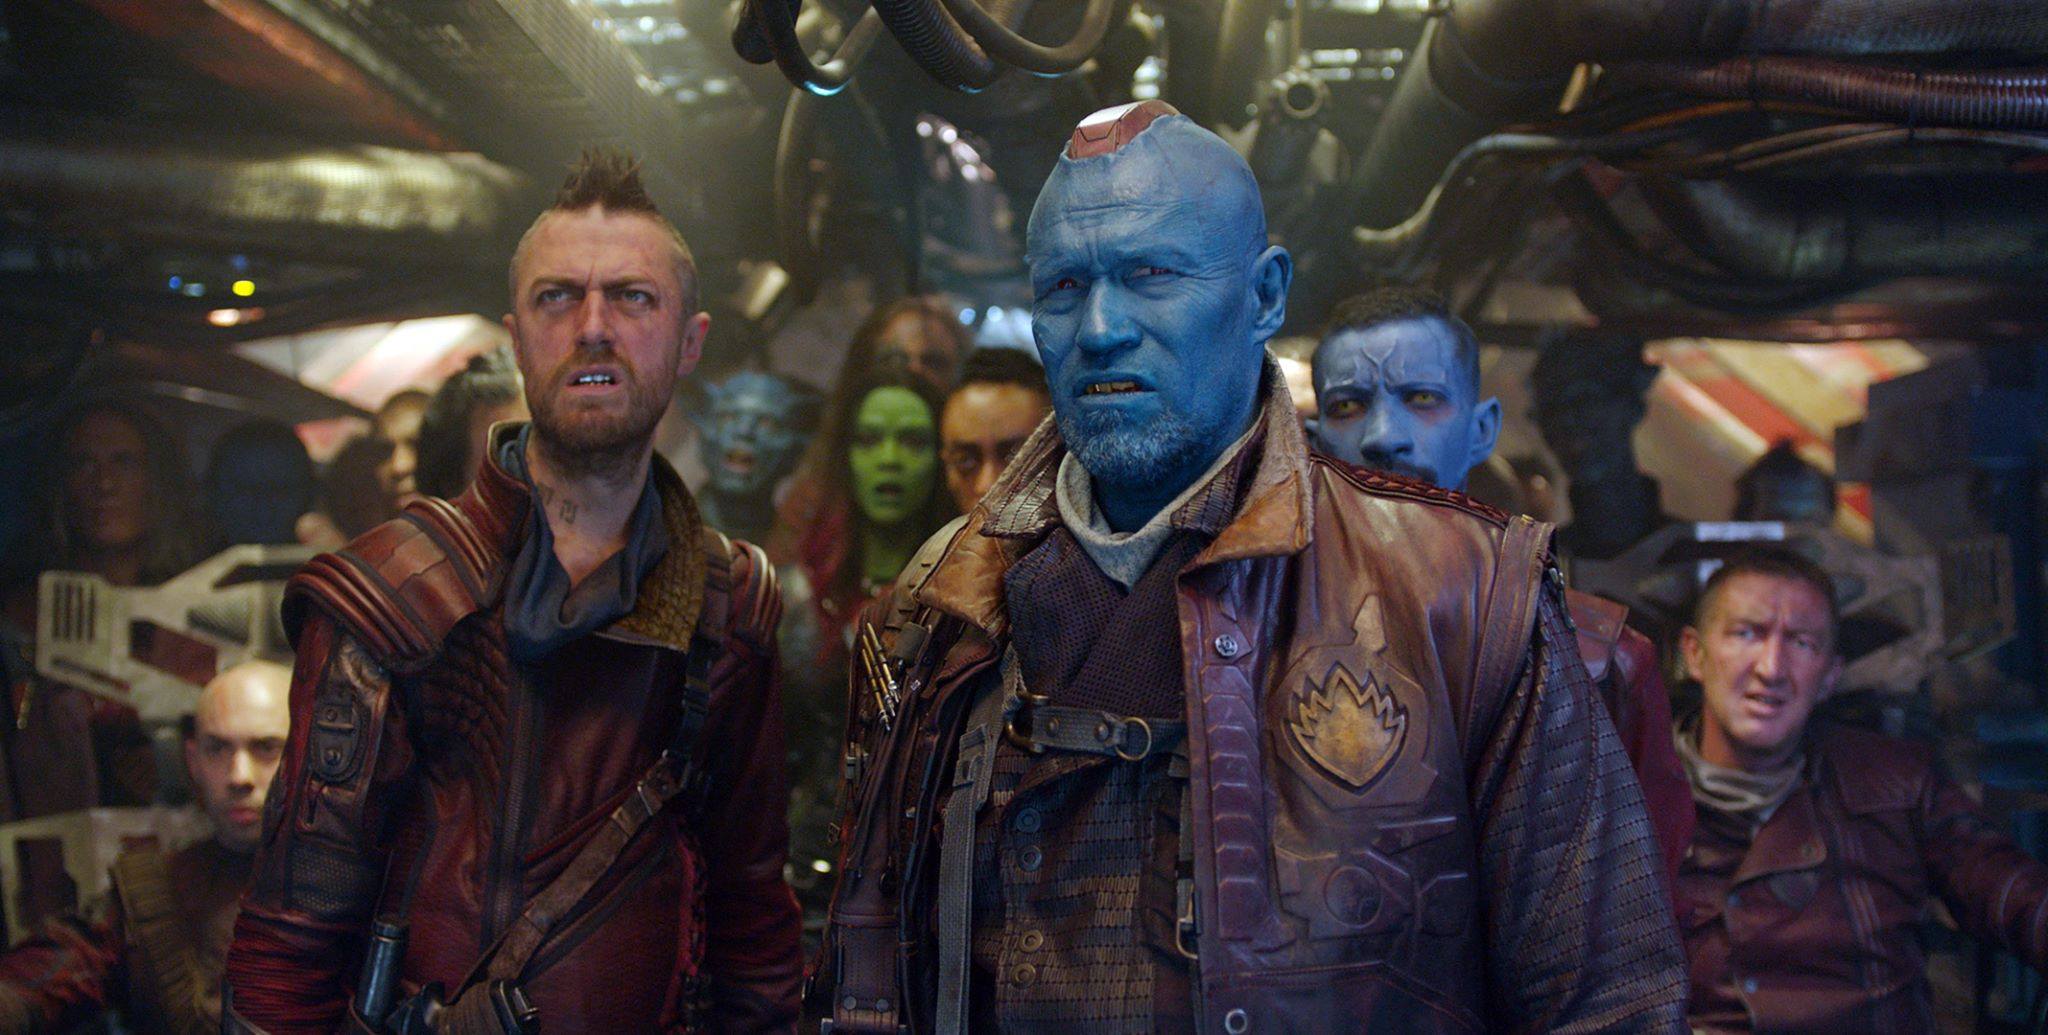 Get a closer look at Michael Rooker's Yondu in Guardians of the Galaxy